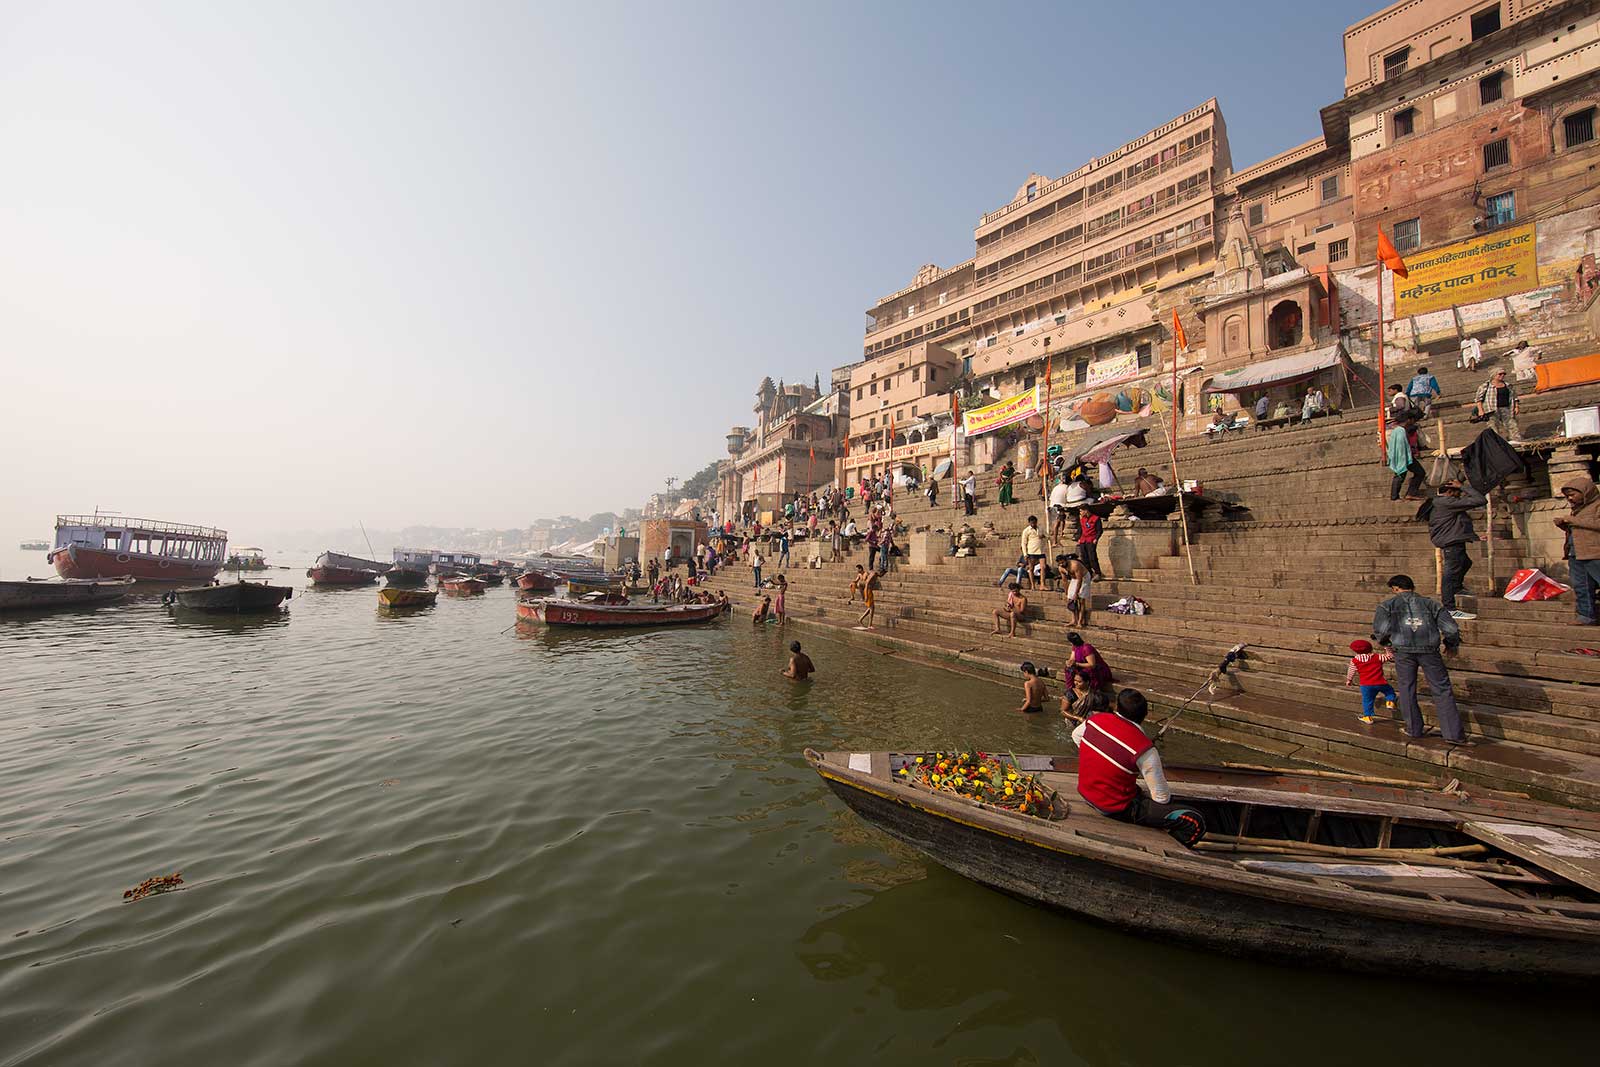 Most of the Varanasi ghats were built after 1700 AD. Many ghats are associated with legends or mythologies while many others are also privately owned. Morning boat ride on the Ganges across the ghats is a popular visitors attraction.